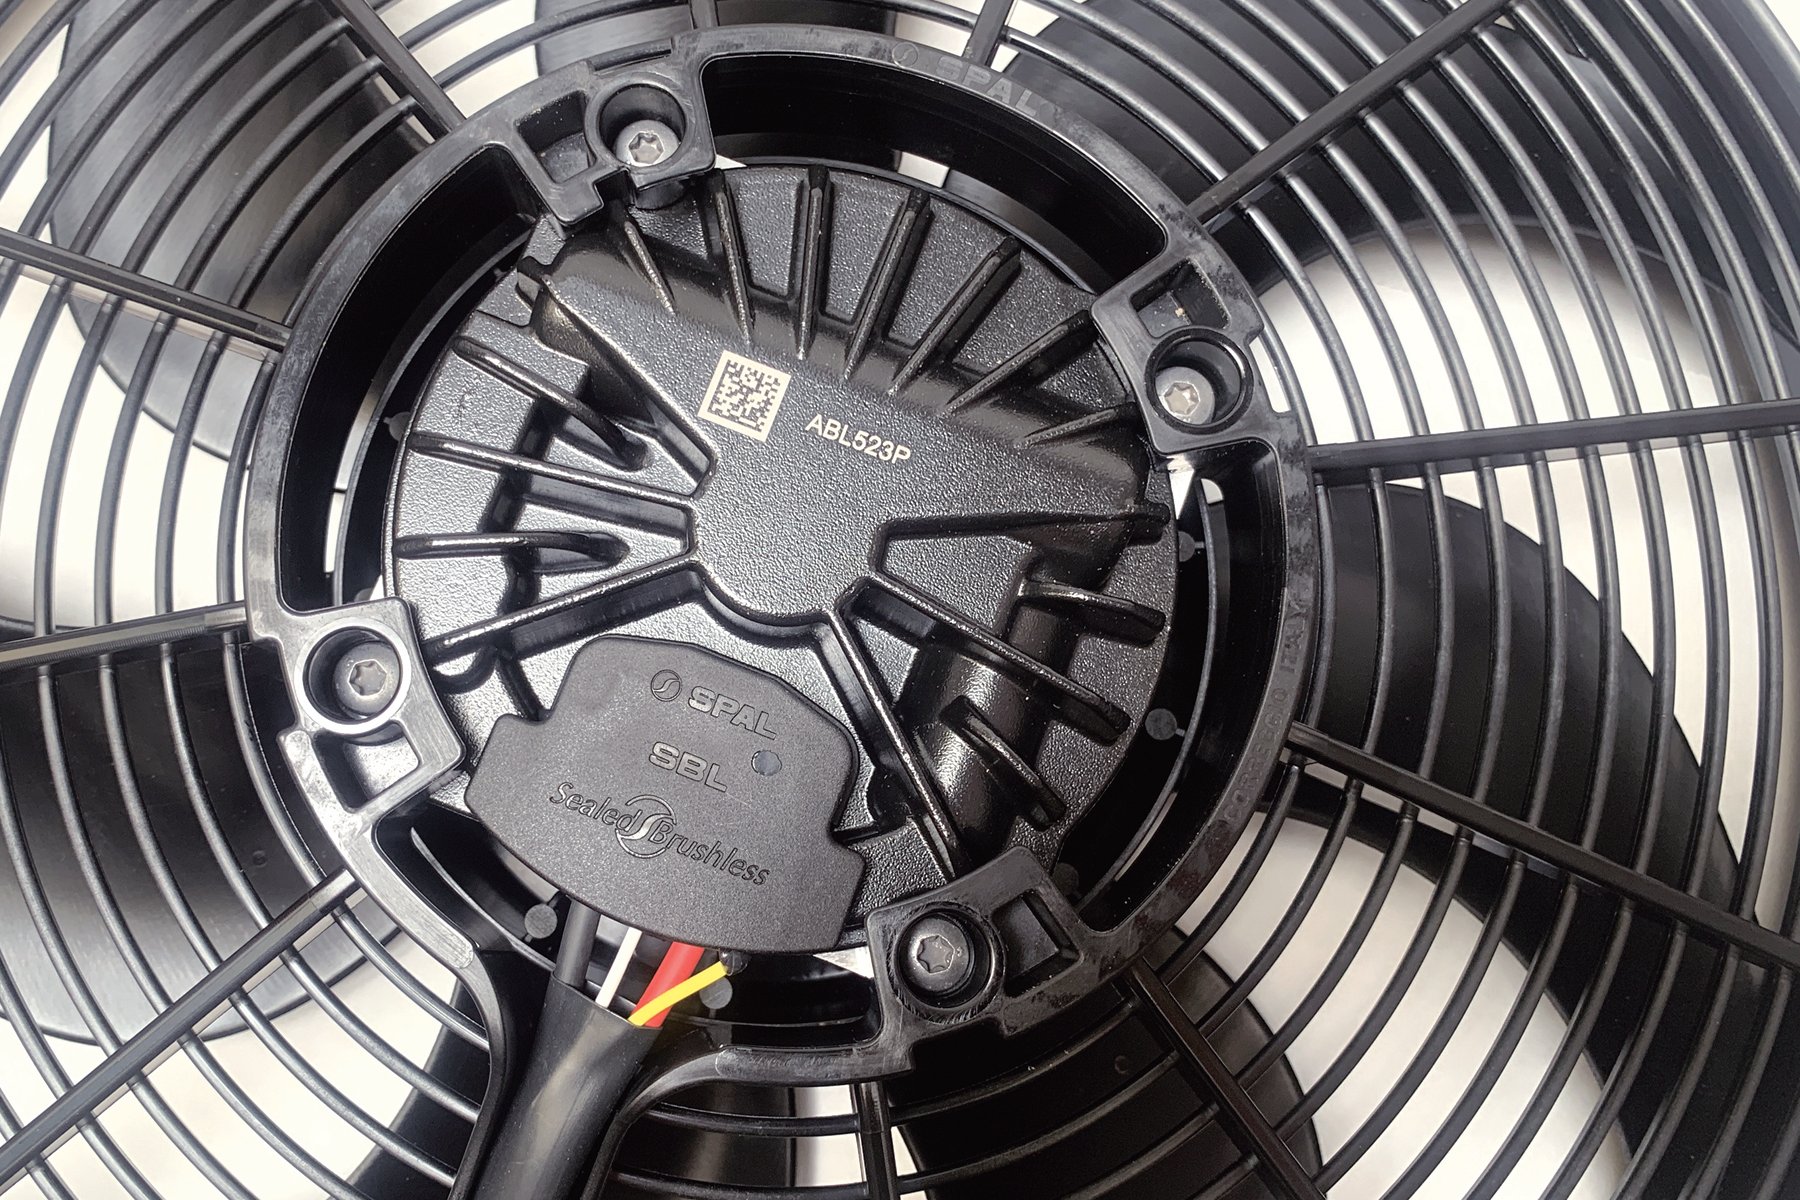 Is Your Car Overheating? Here’s A New SPAL Fan That Can Help